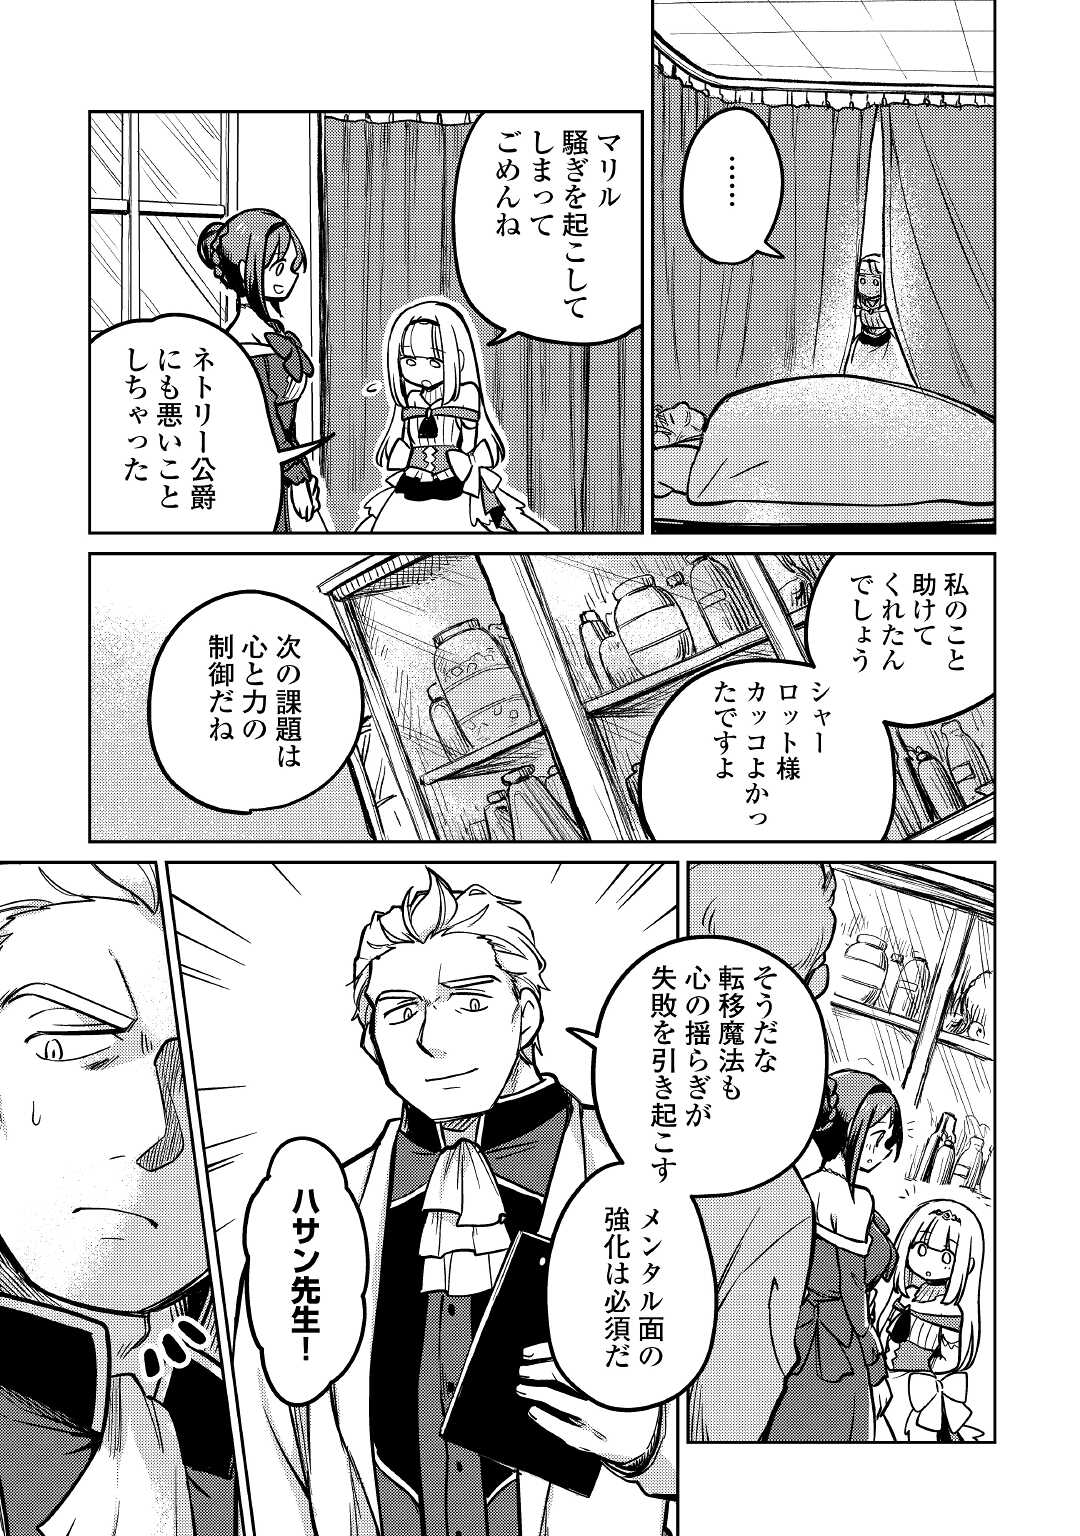 The Former Structural Researcher’s Story of Otherworldly Adventure 第42話 - Page 19